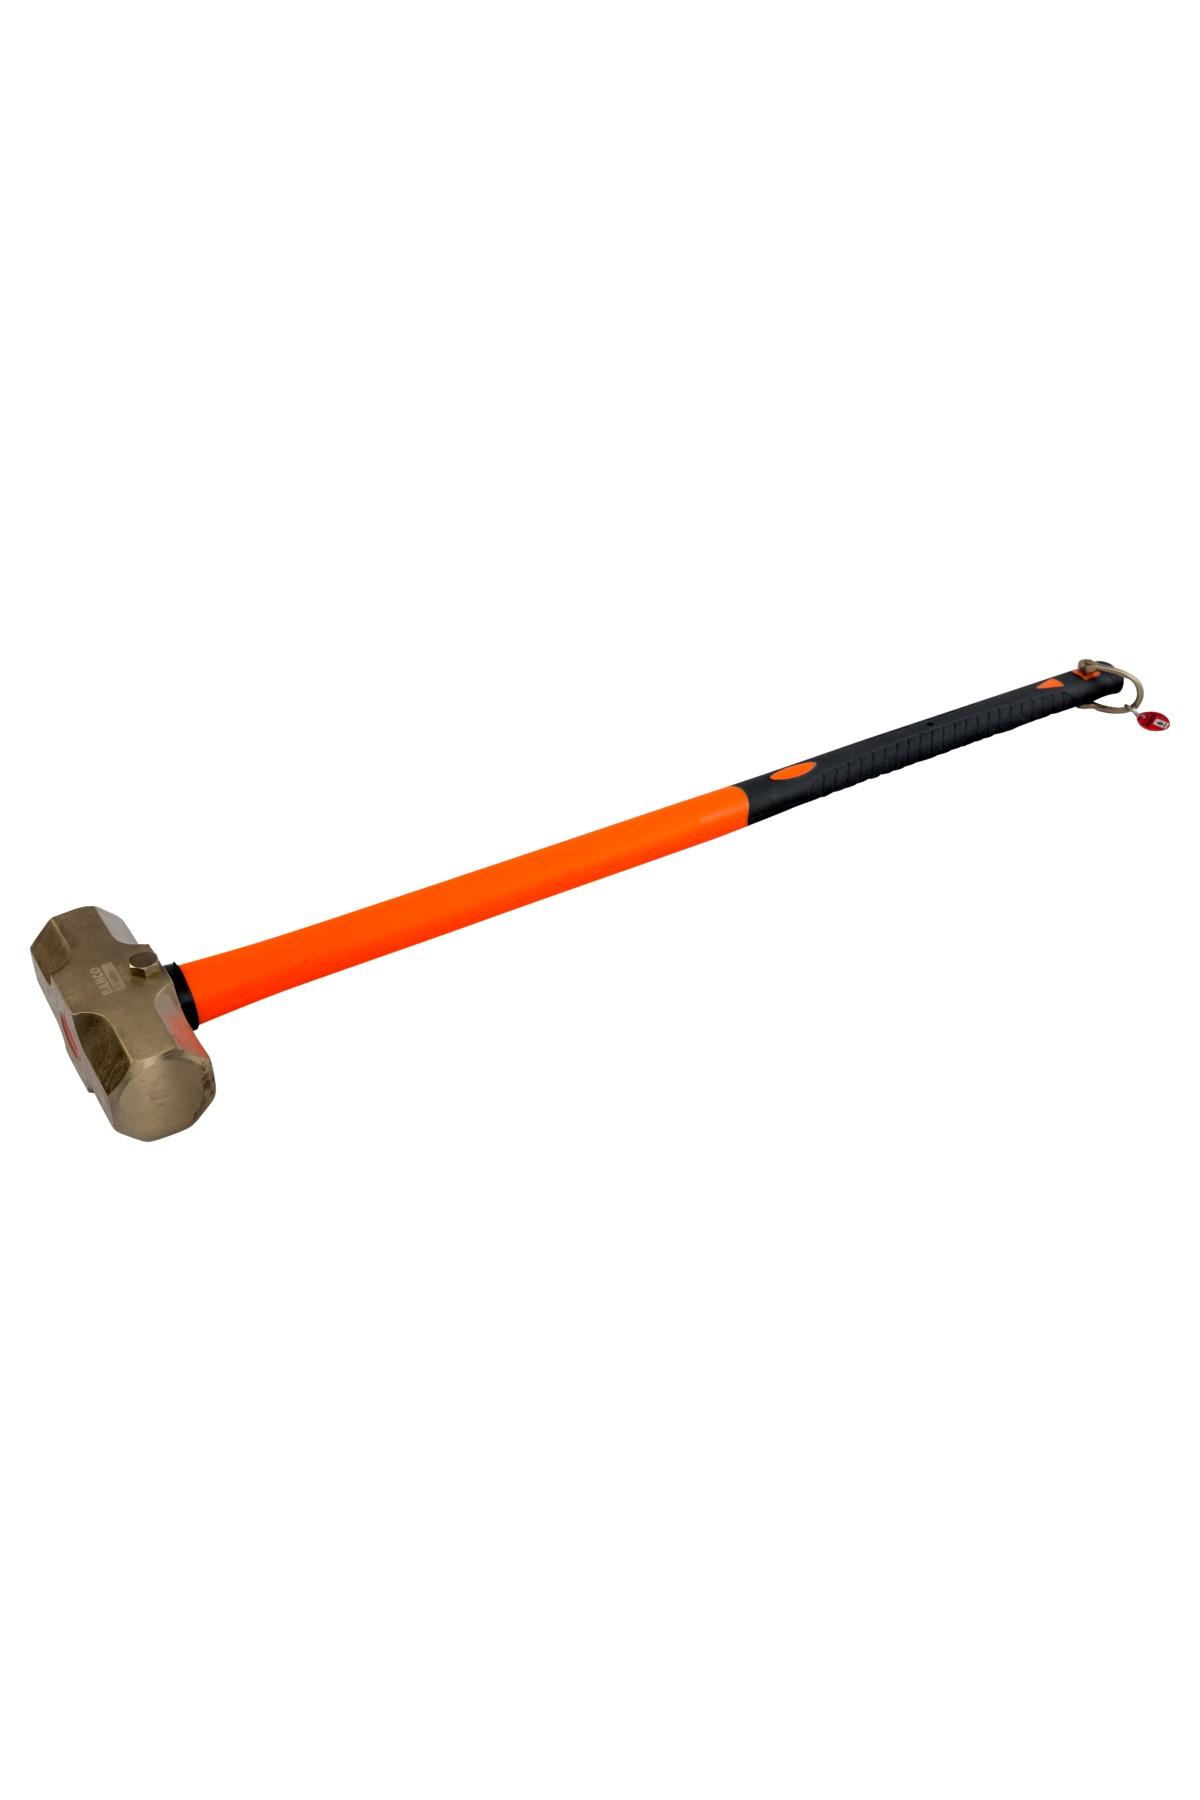 Spark-free and anti-magnetic hammer 4500g height-secured